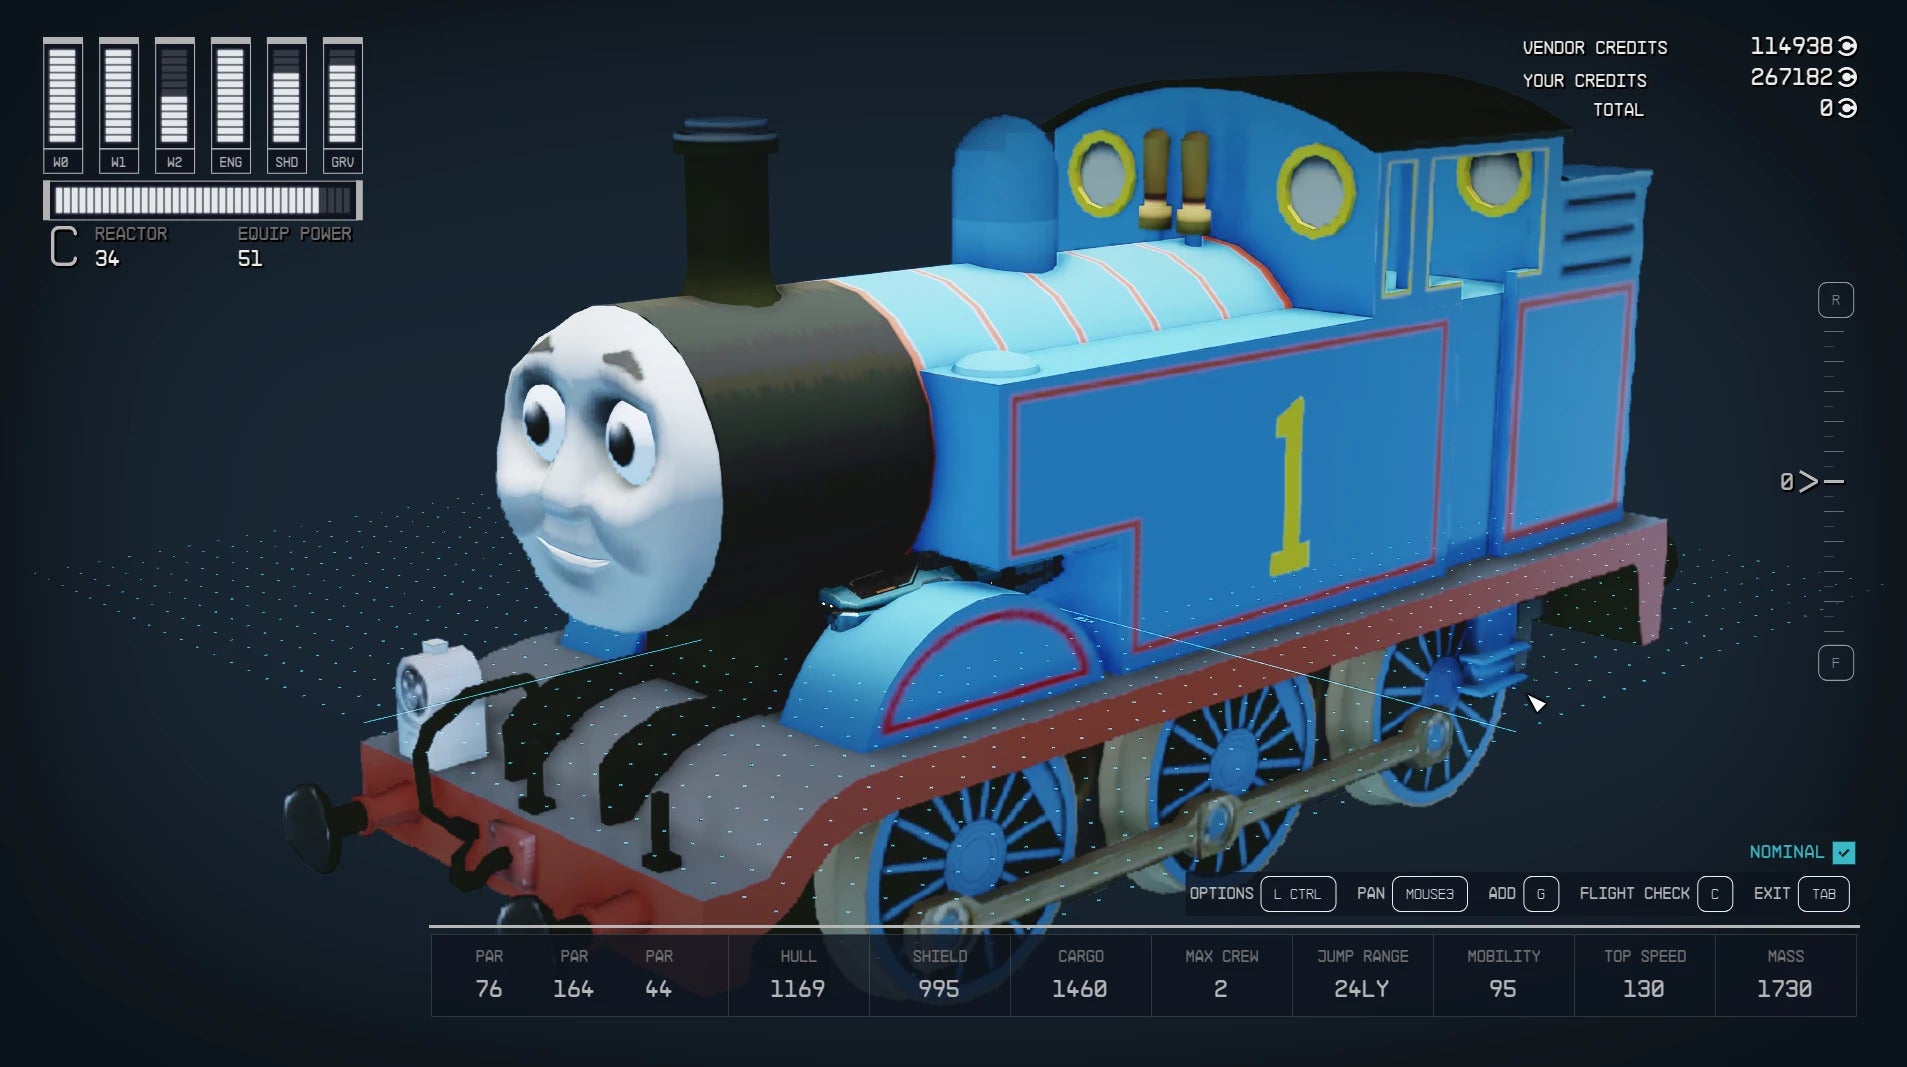 Read more about the article Hilarious Mod Alert: Thomas the Tank Engine Takes Over Starships in Bethesda RPGs!